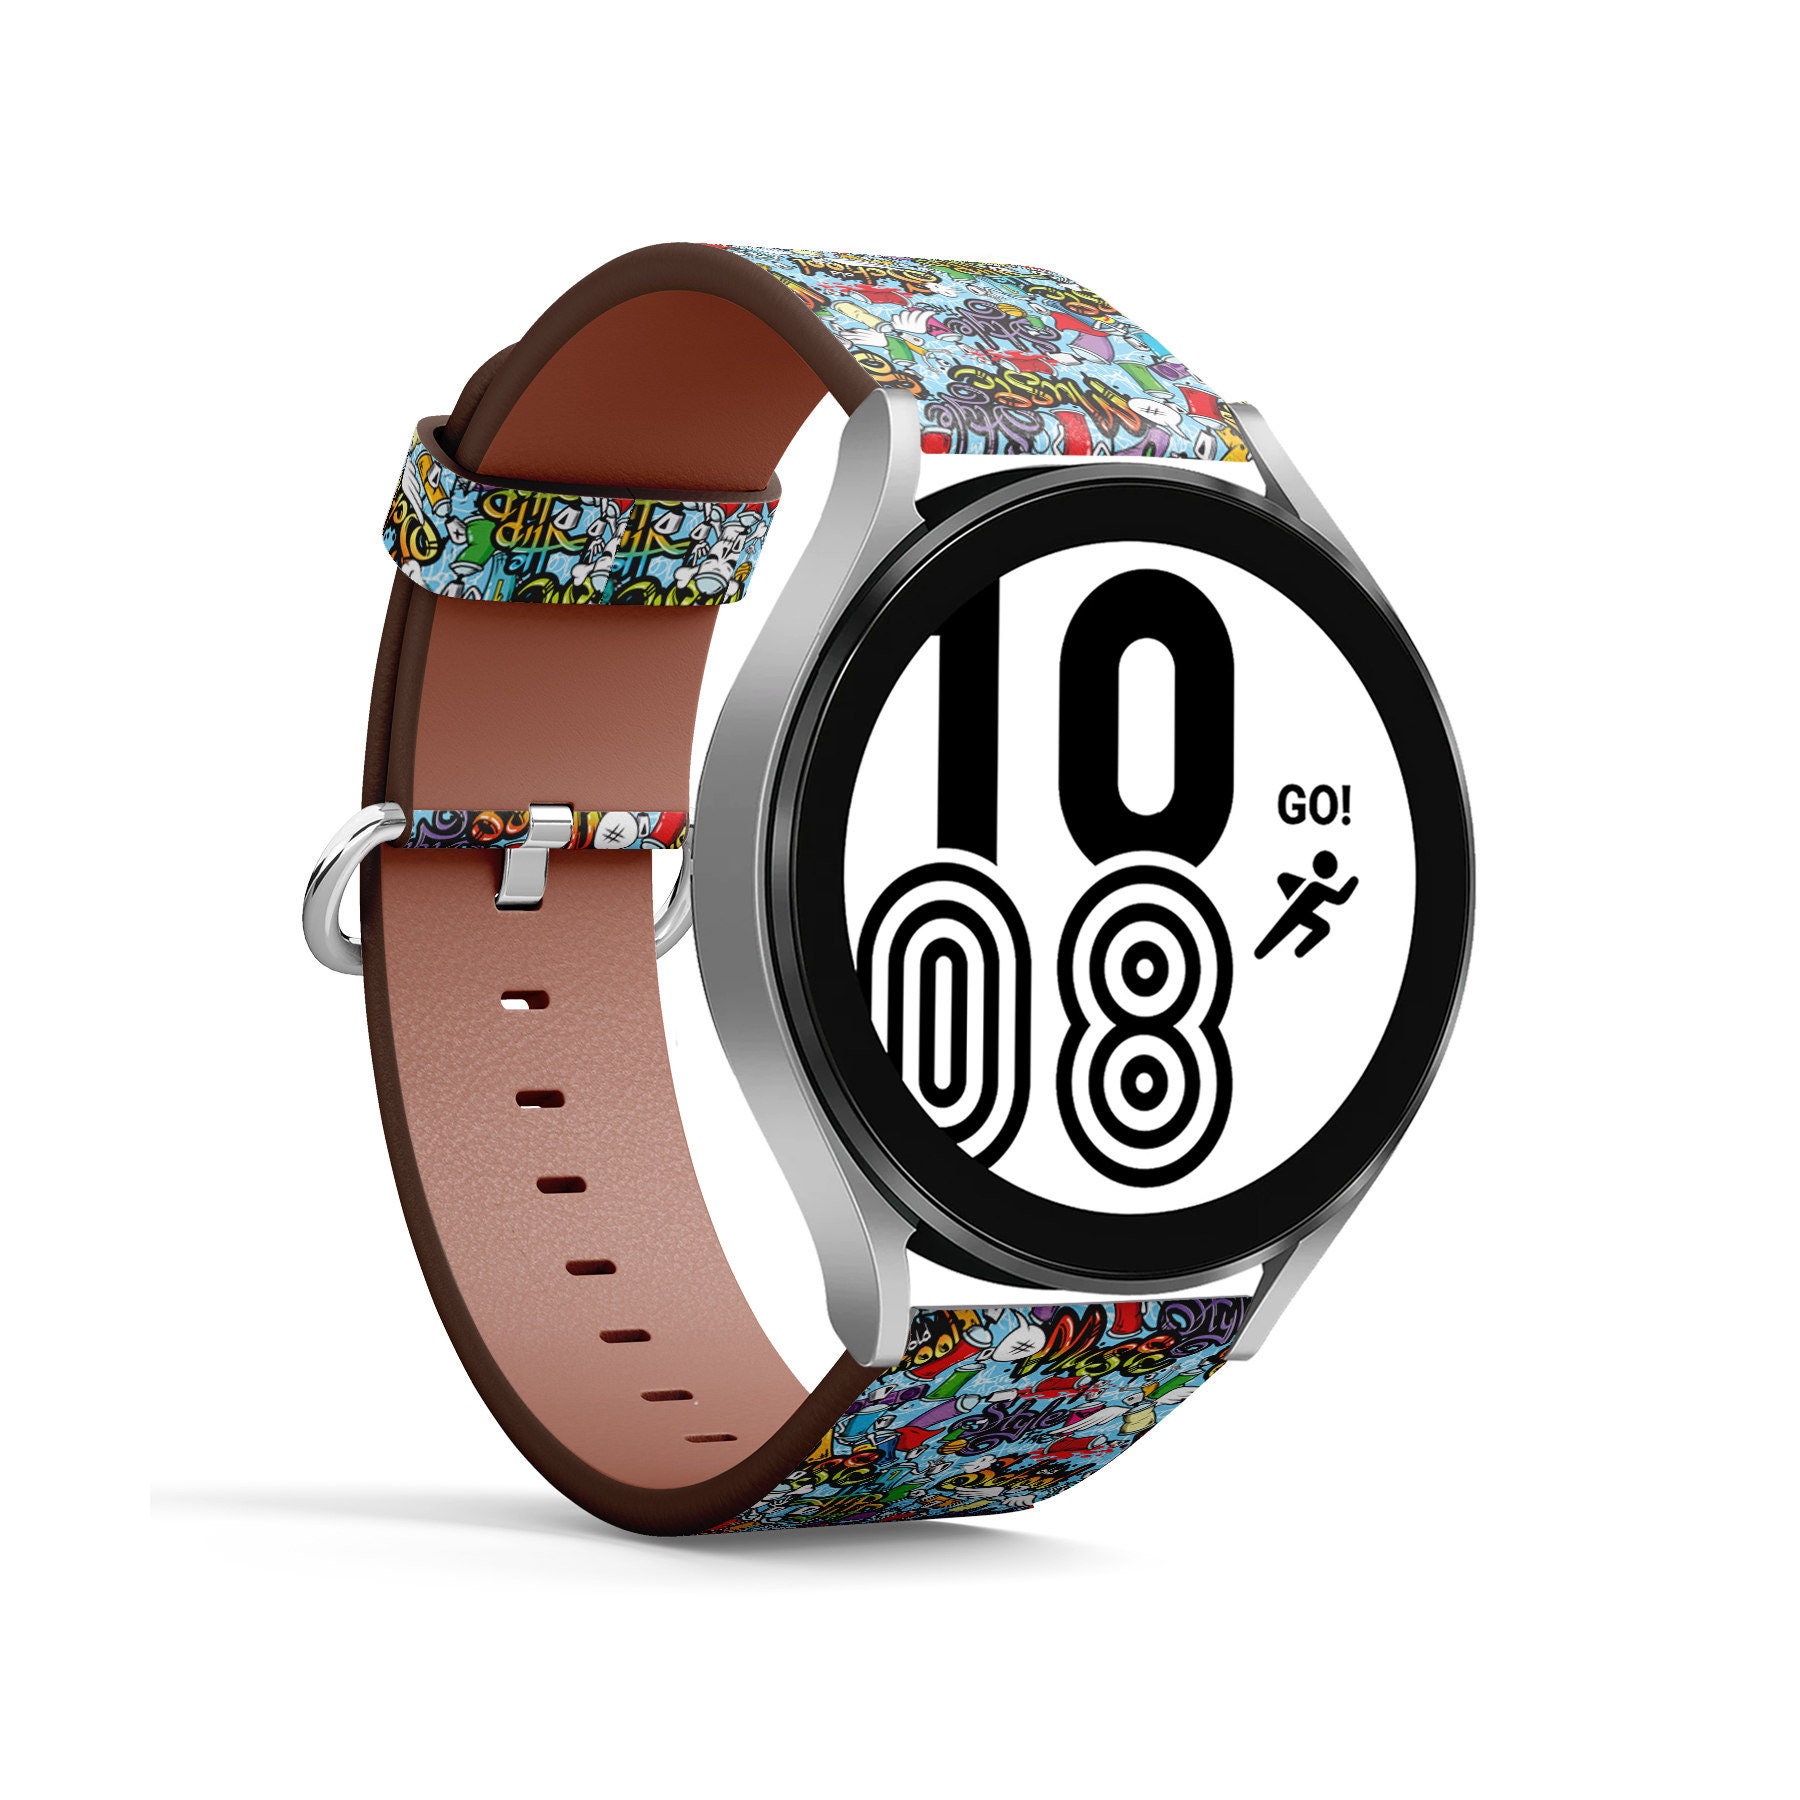 Band for Samsung Smartwatches Decorative Graffiti Spray Can - Etsy